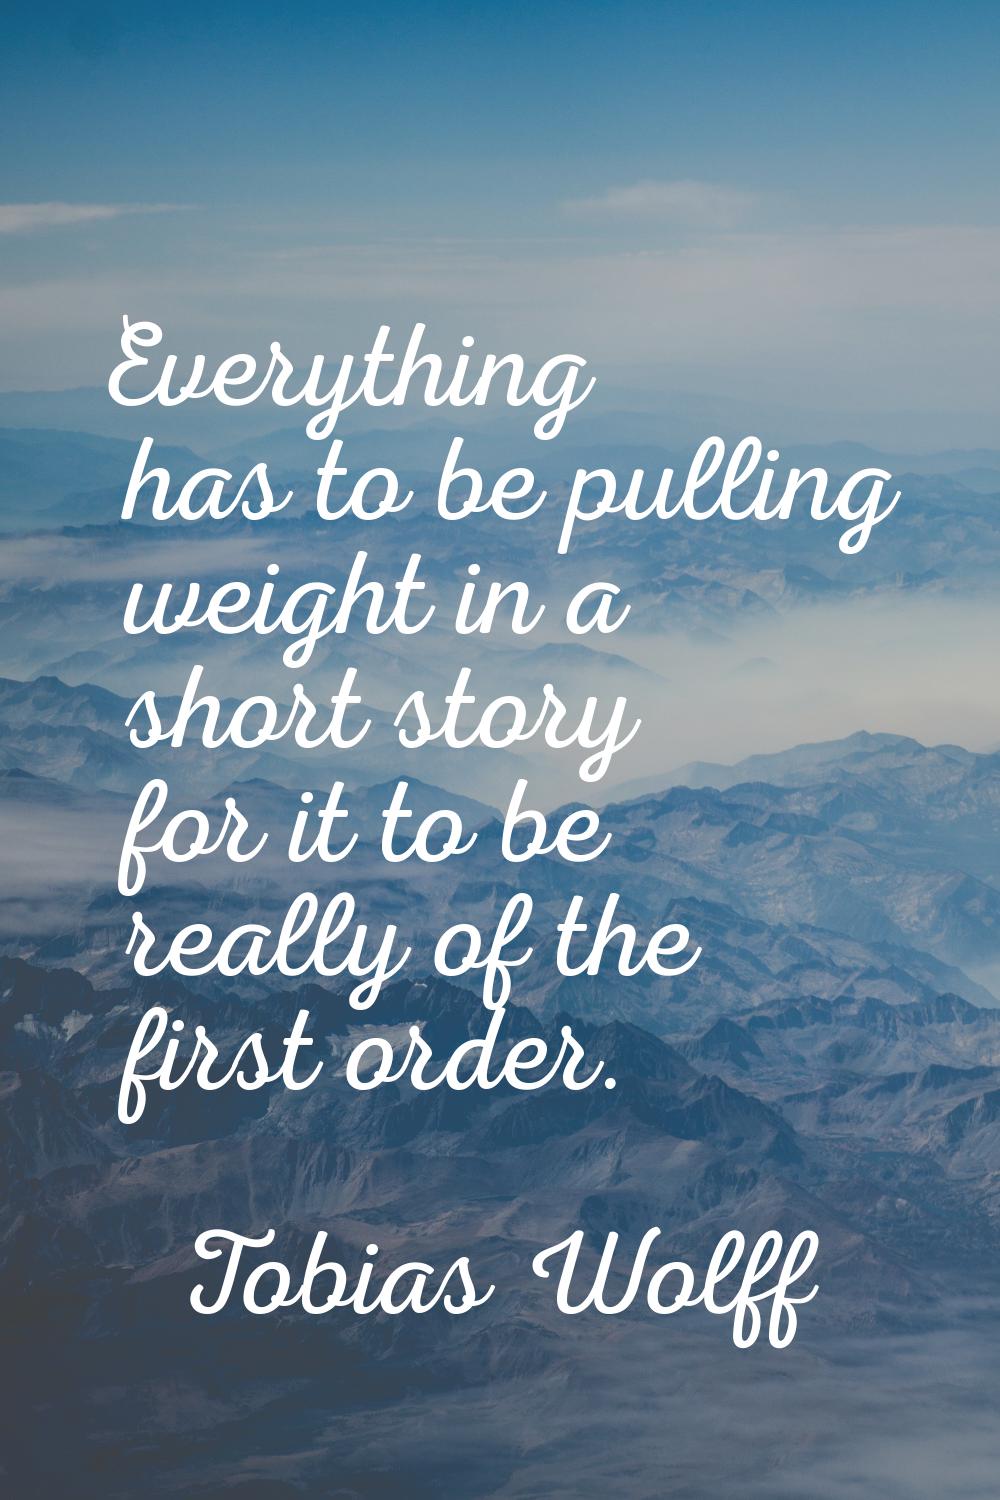 Everything has to be pulling weight in a short story for it to be really of the first order.